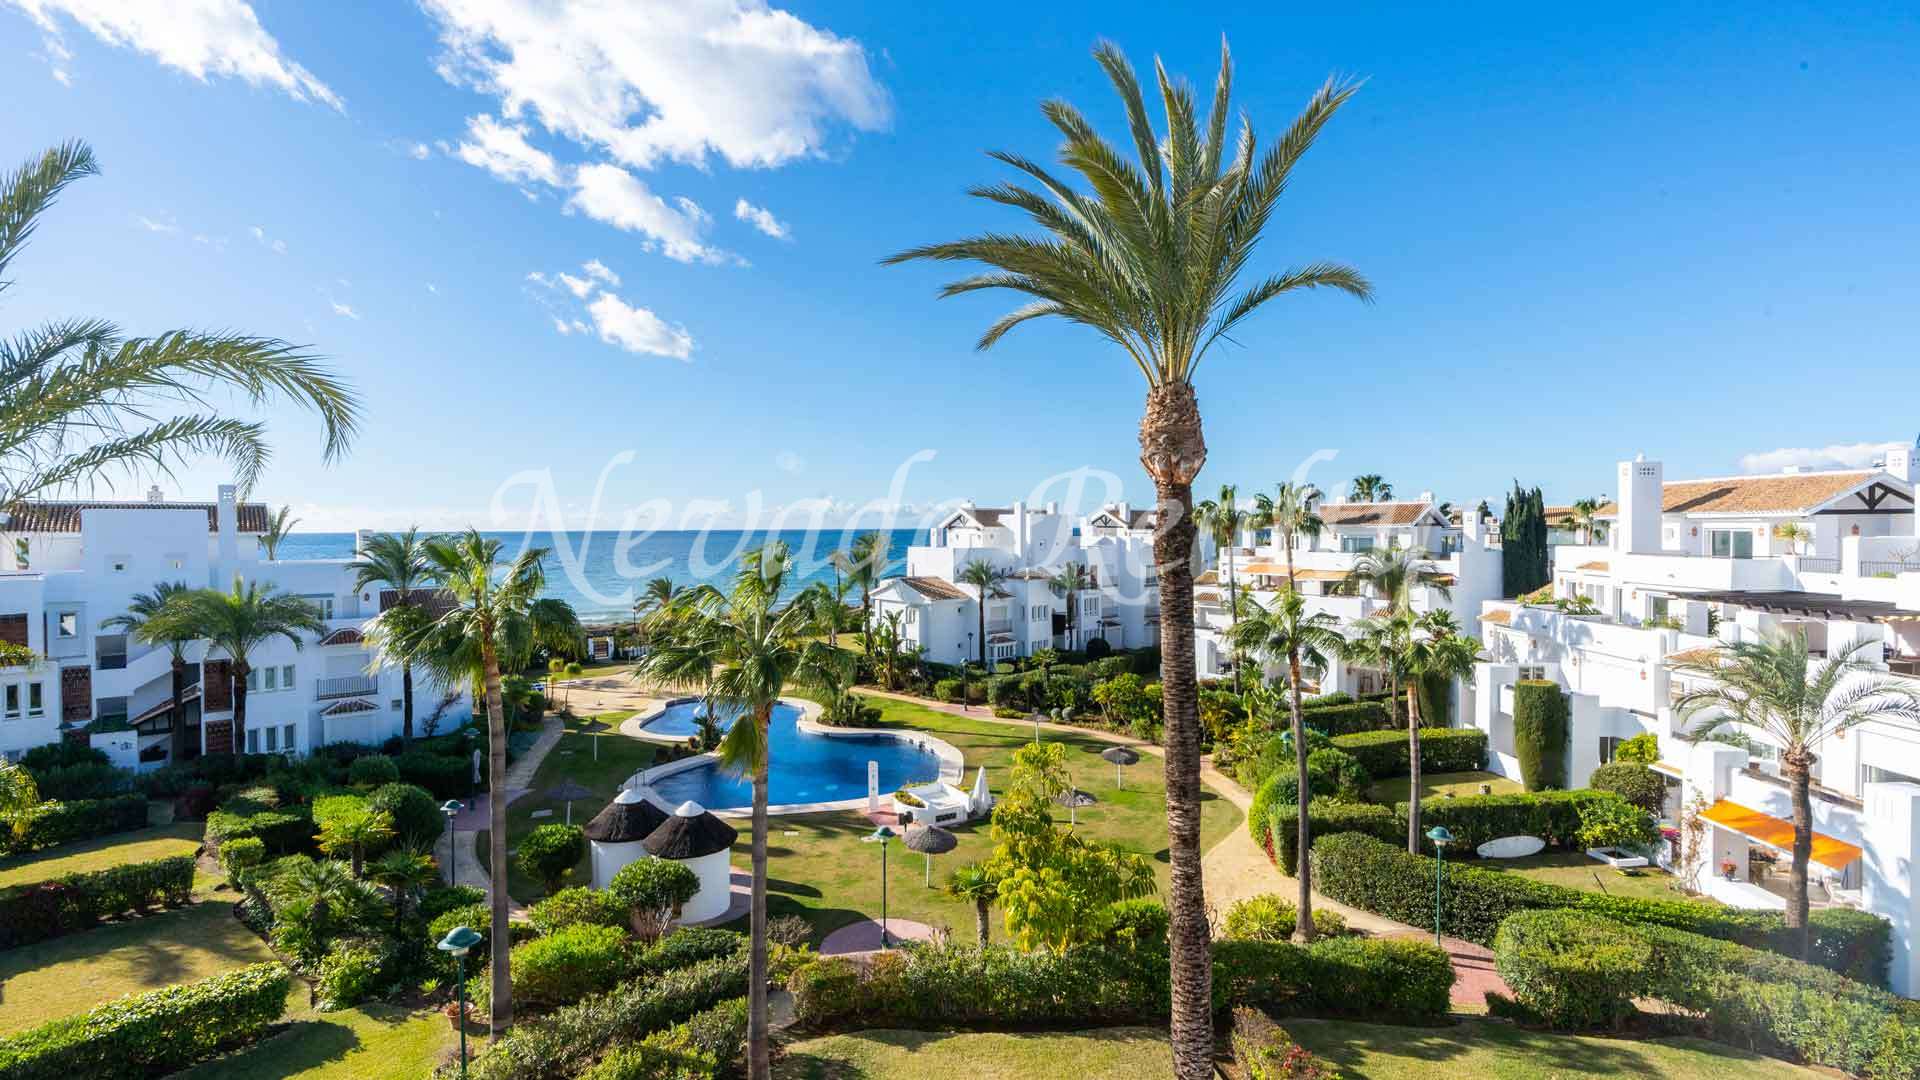 													Beachfront penthouse with sea views next to Río Real Golf for sale
											